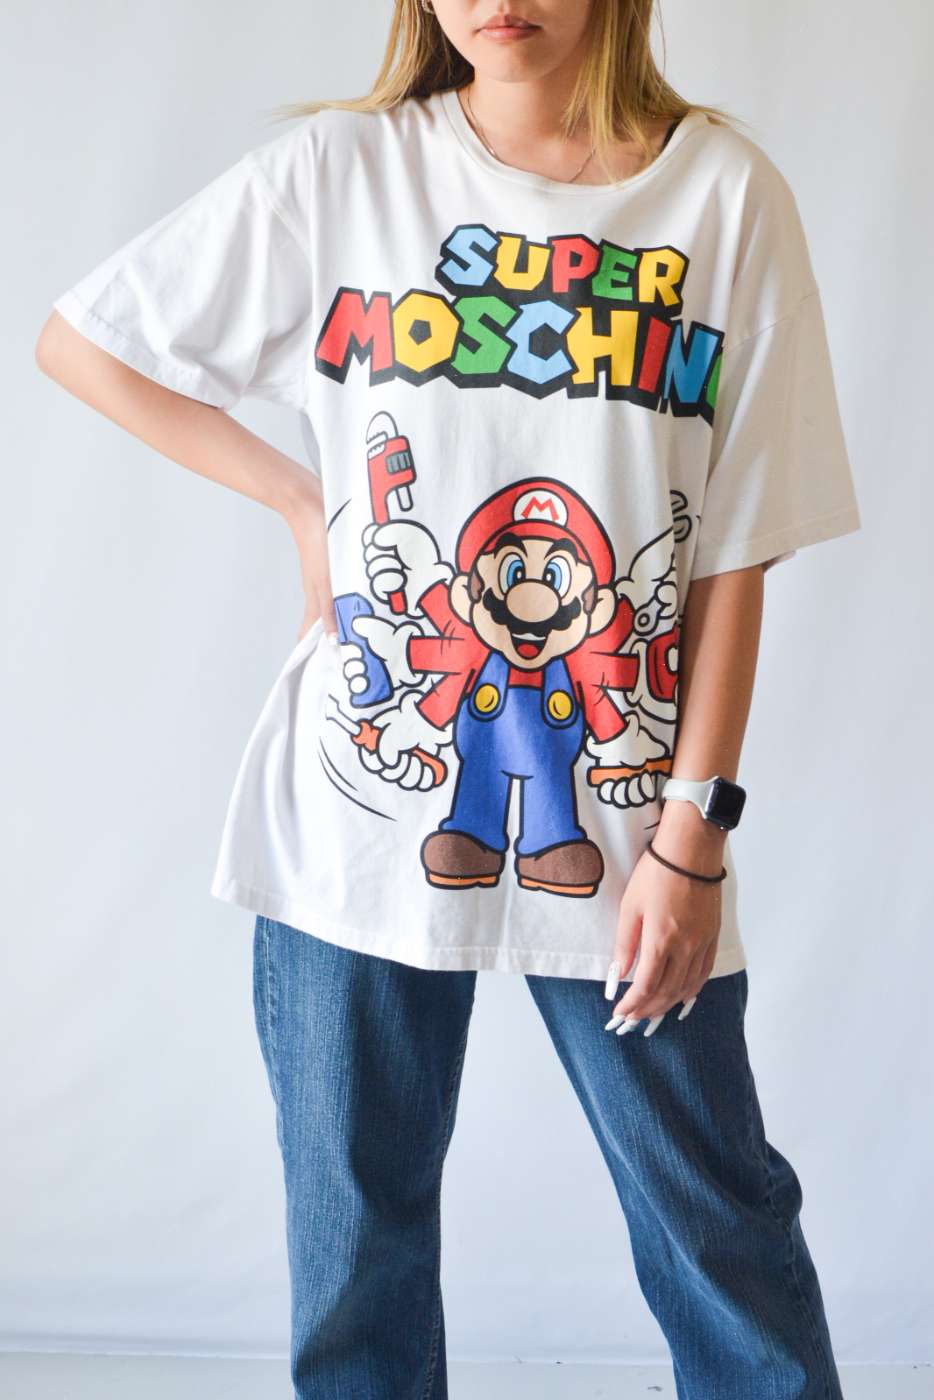 MOSCHINO　プリントTｼｬﾂ